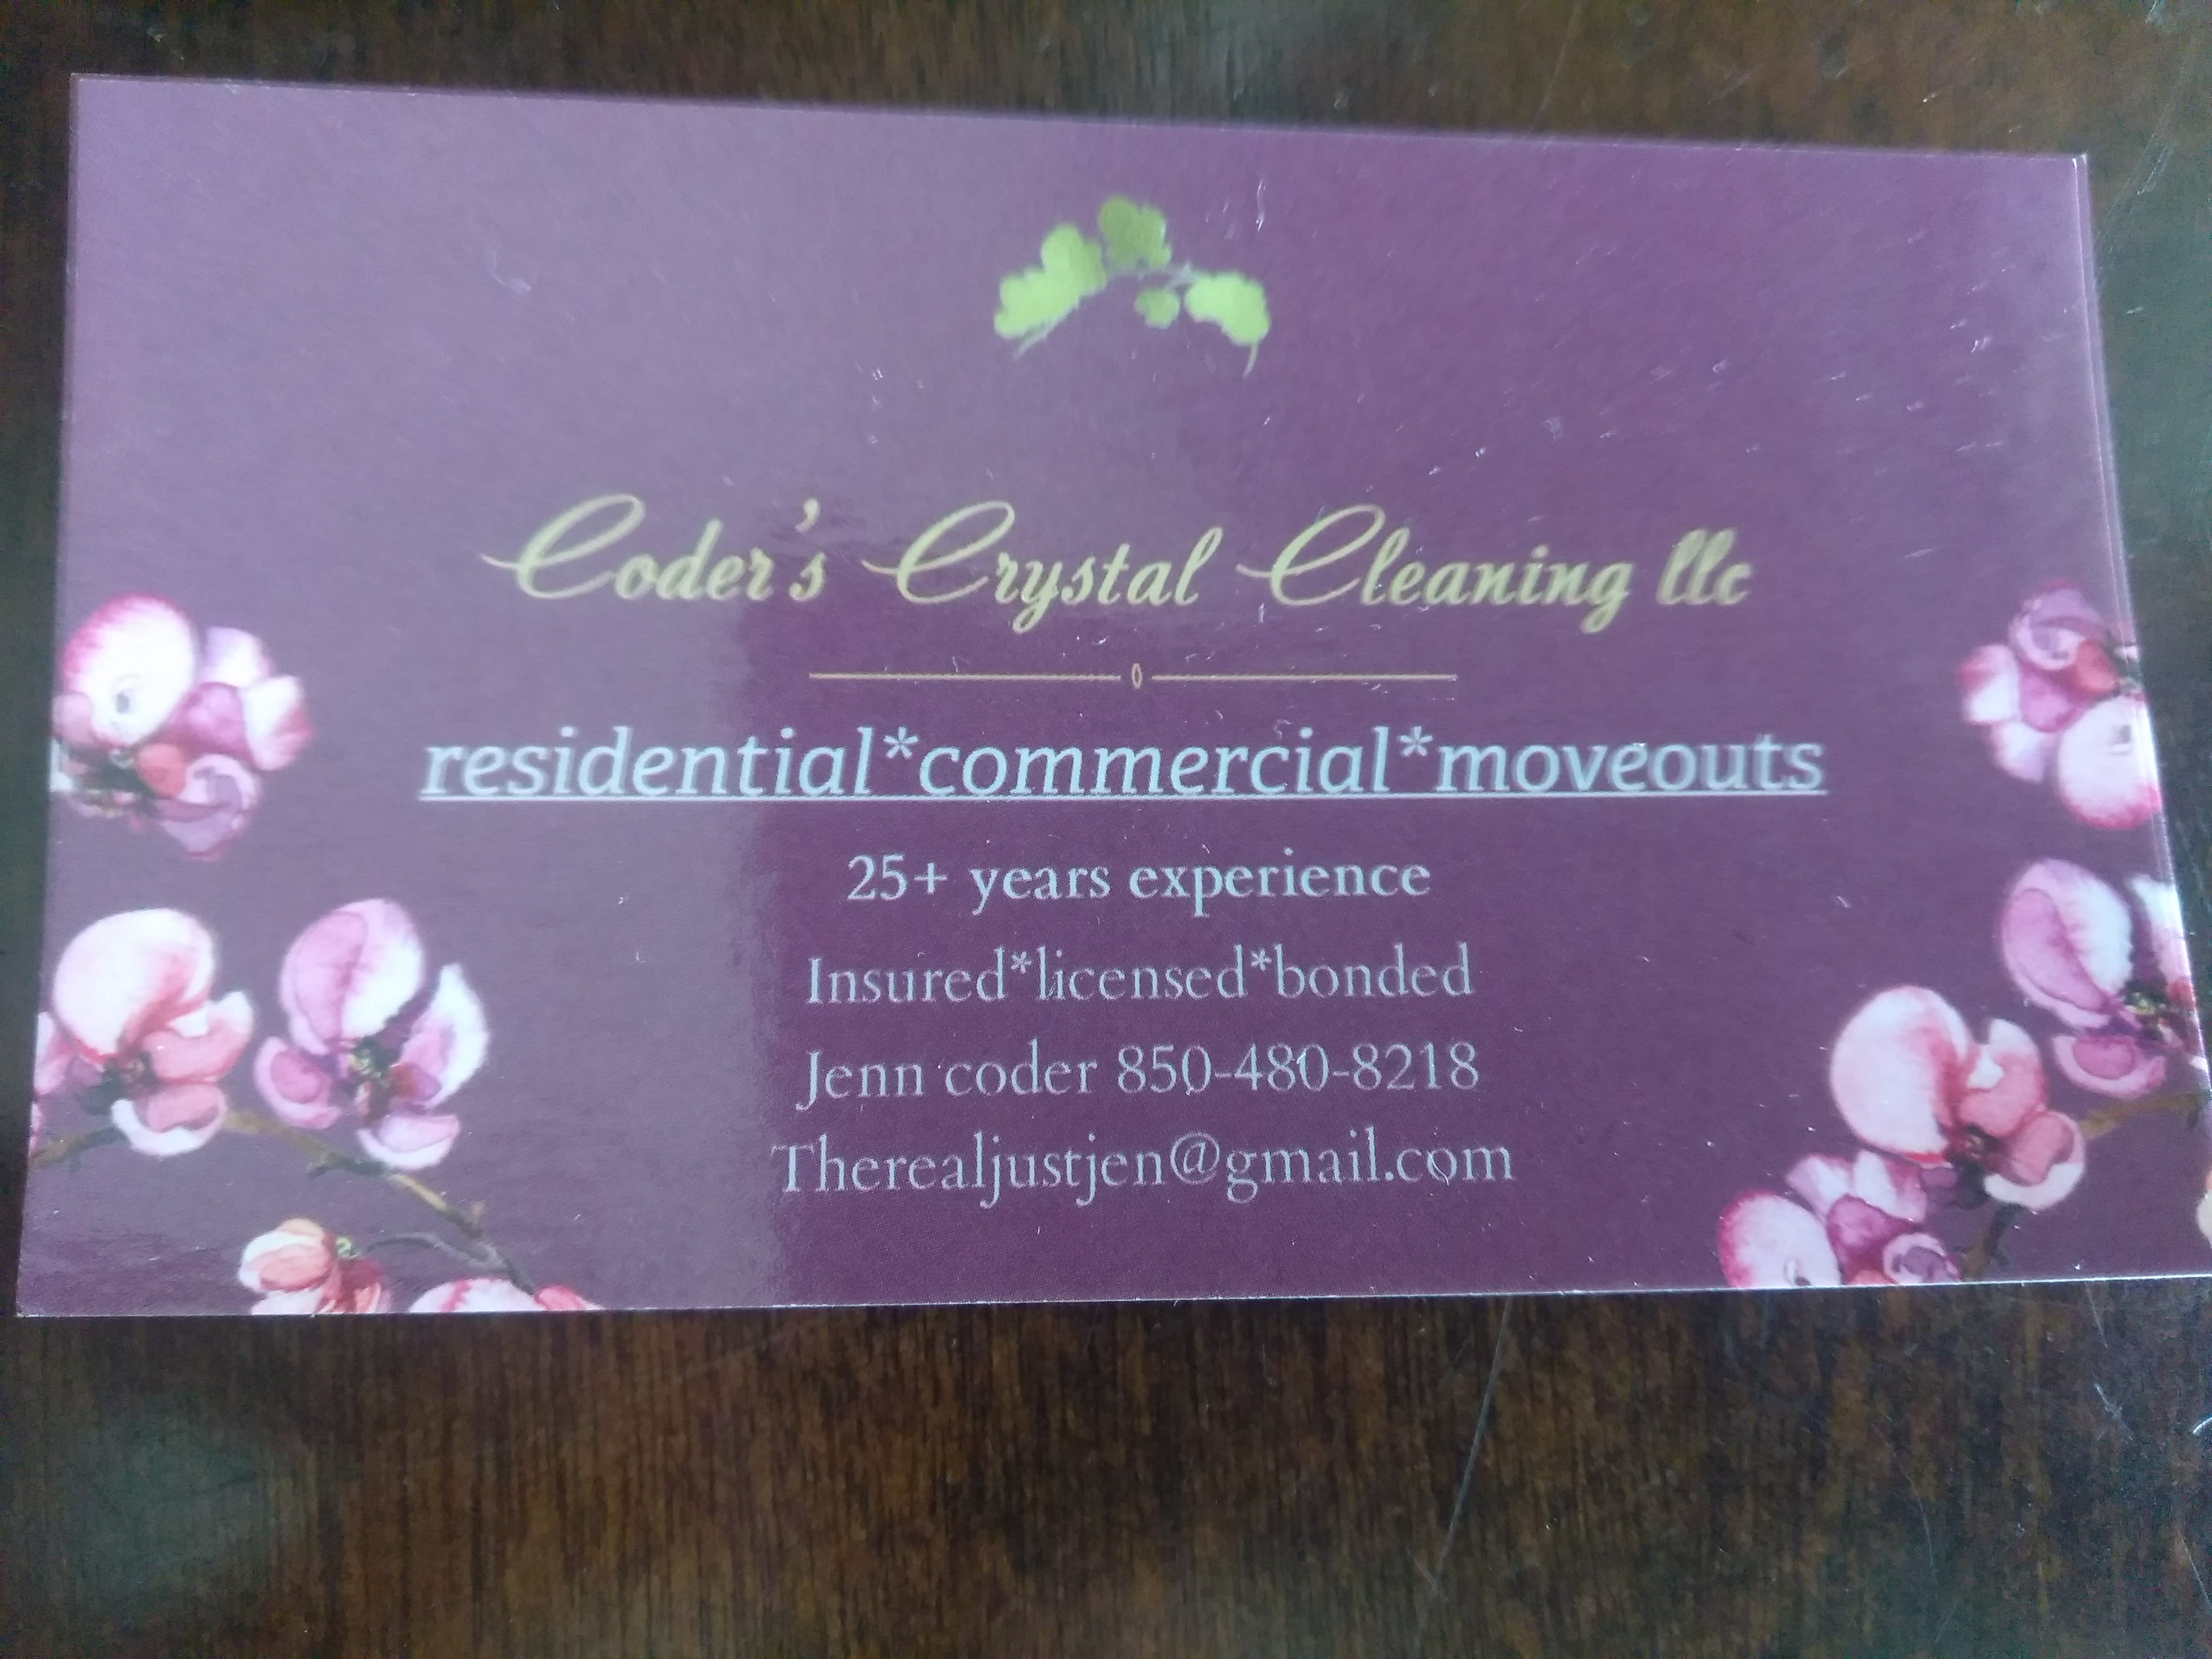 Coder's Crystal Cleaning LLC